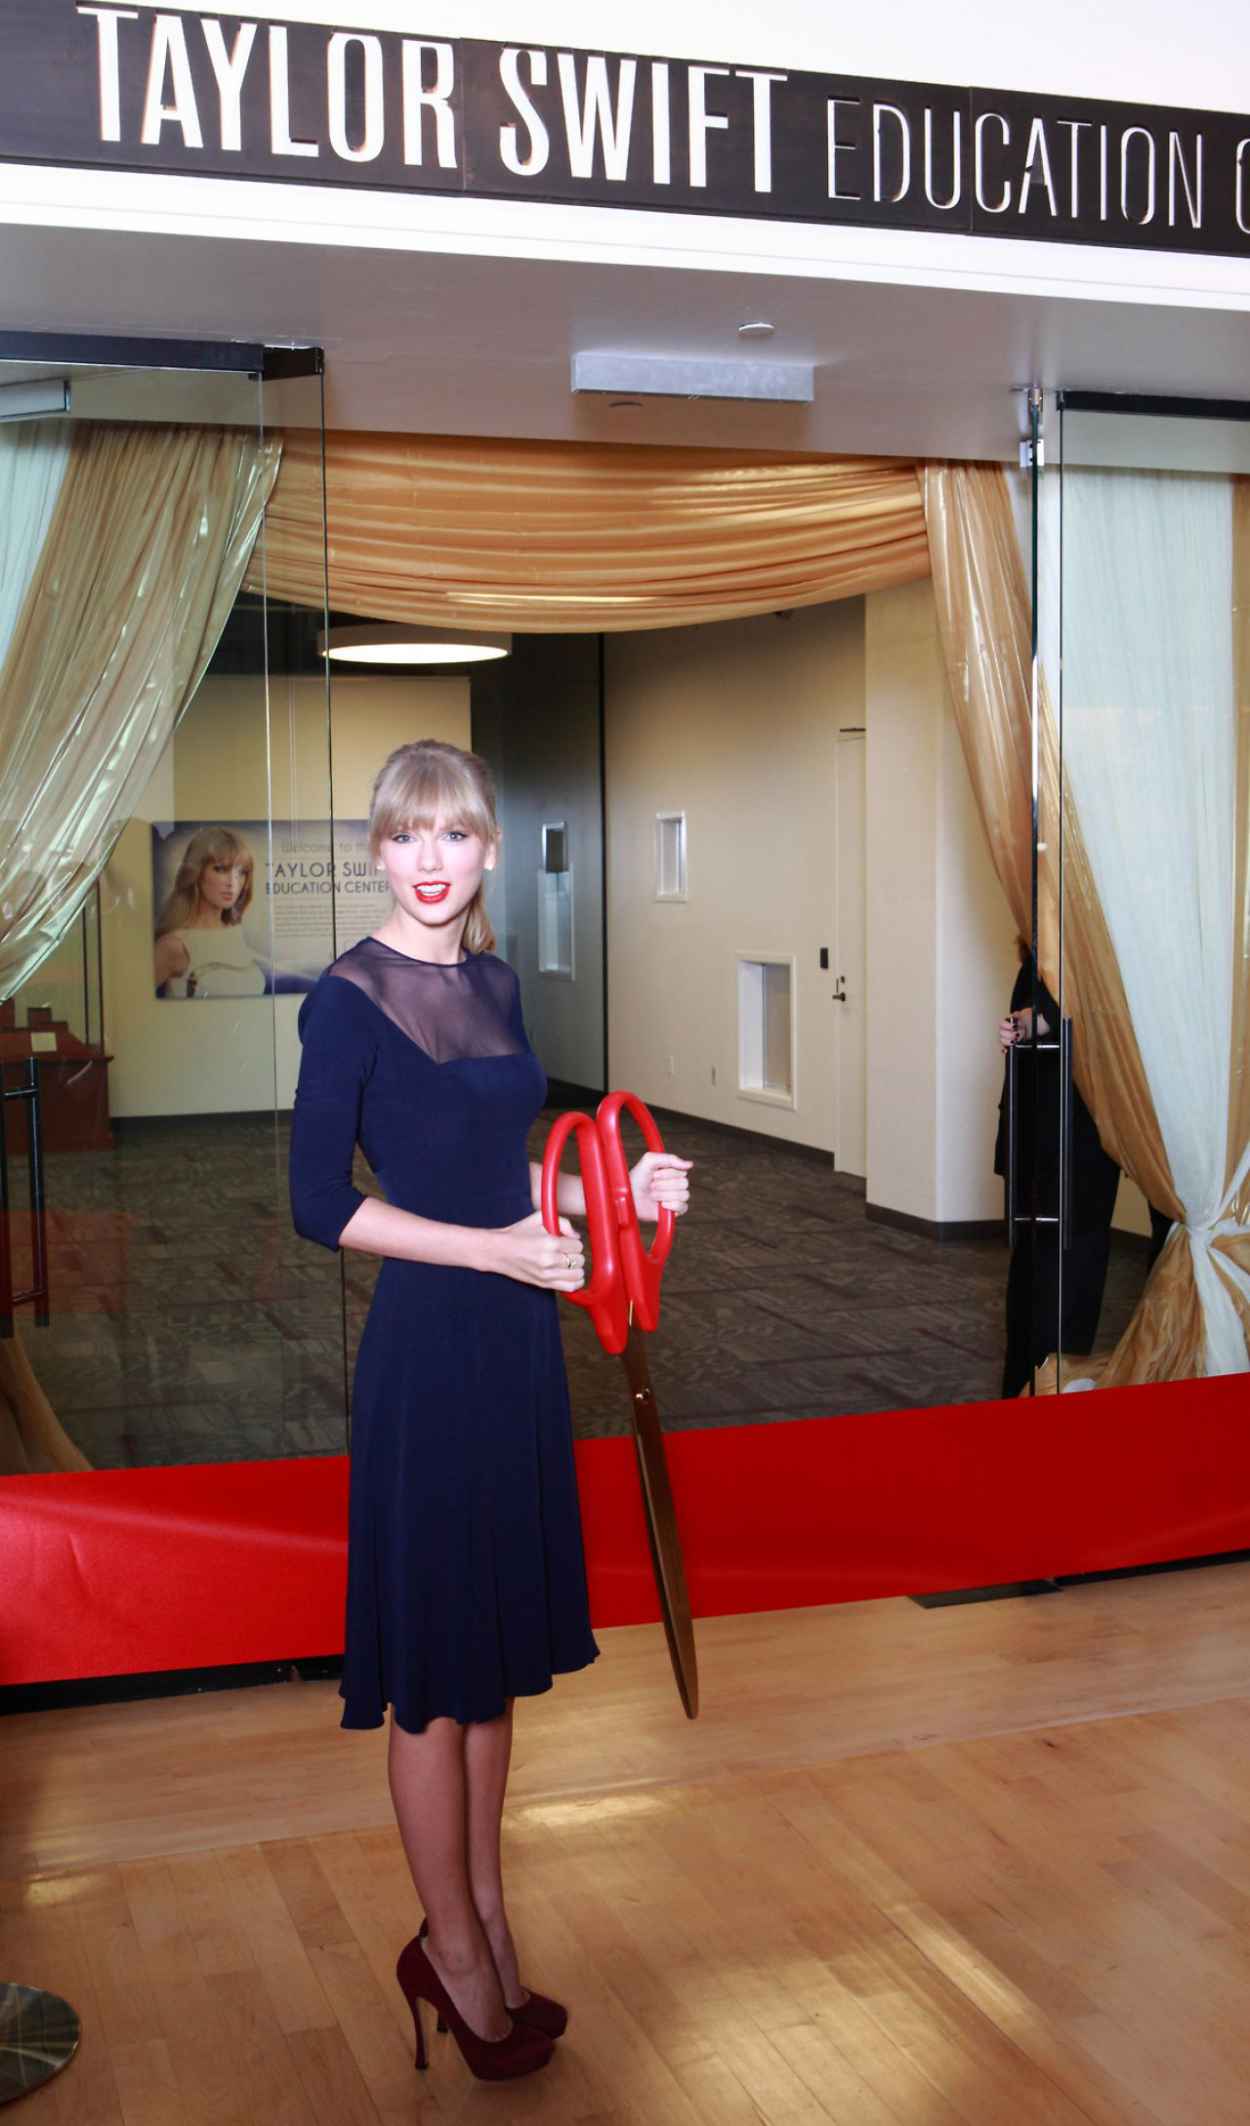 Taylor Swift at Opening of the Taylor Swift Education Center in Nashville-1